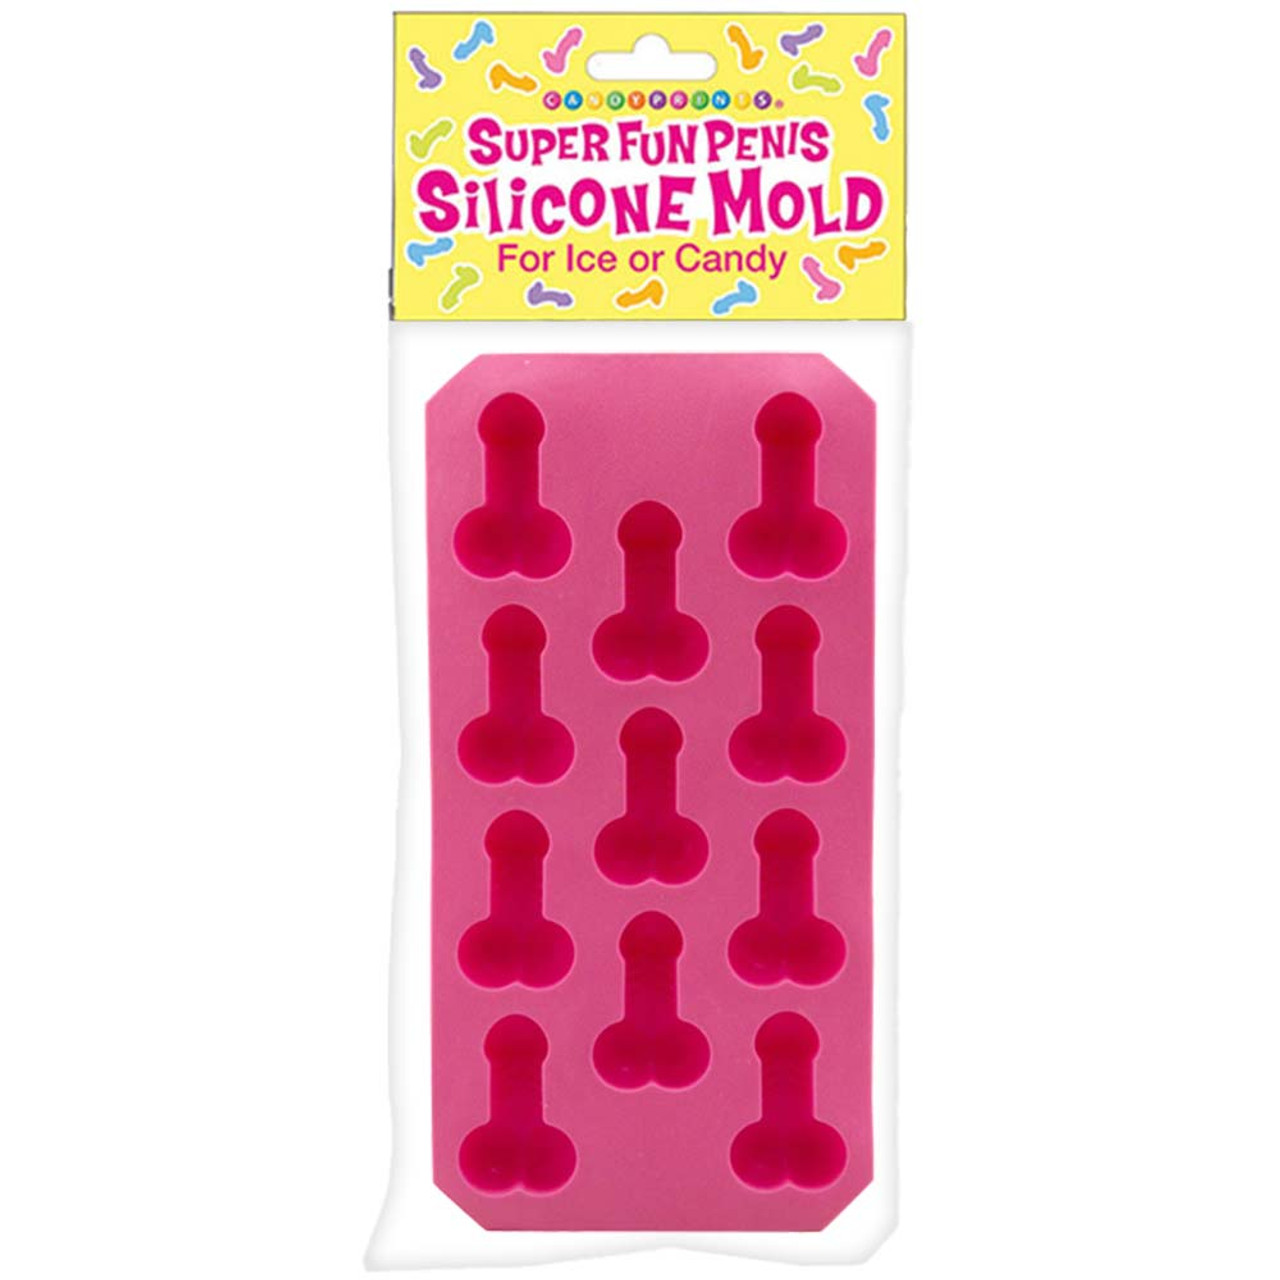 https://cdn11.bigcommerce.com/s-1n8r405nxd/images/stencil/1280x1280/products/11627/24359/93246-F1-Super-Fun-Penis-Silicone-Mold-packaged-front-view__53318.1682436334.jpg?c=2